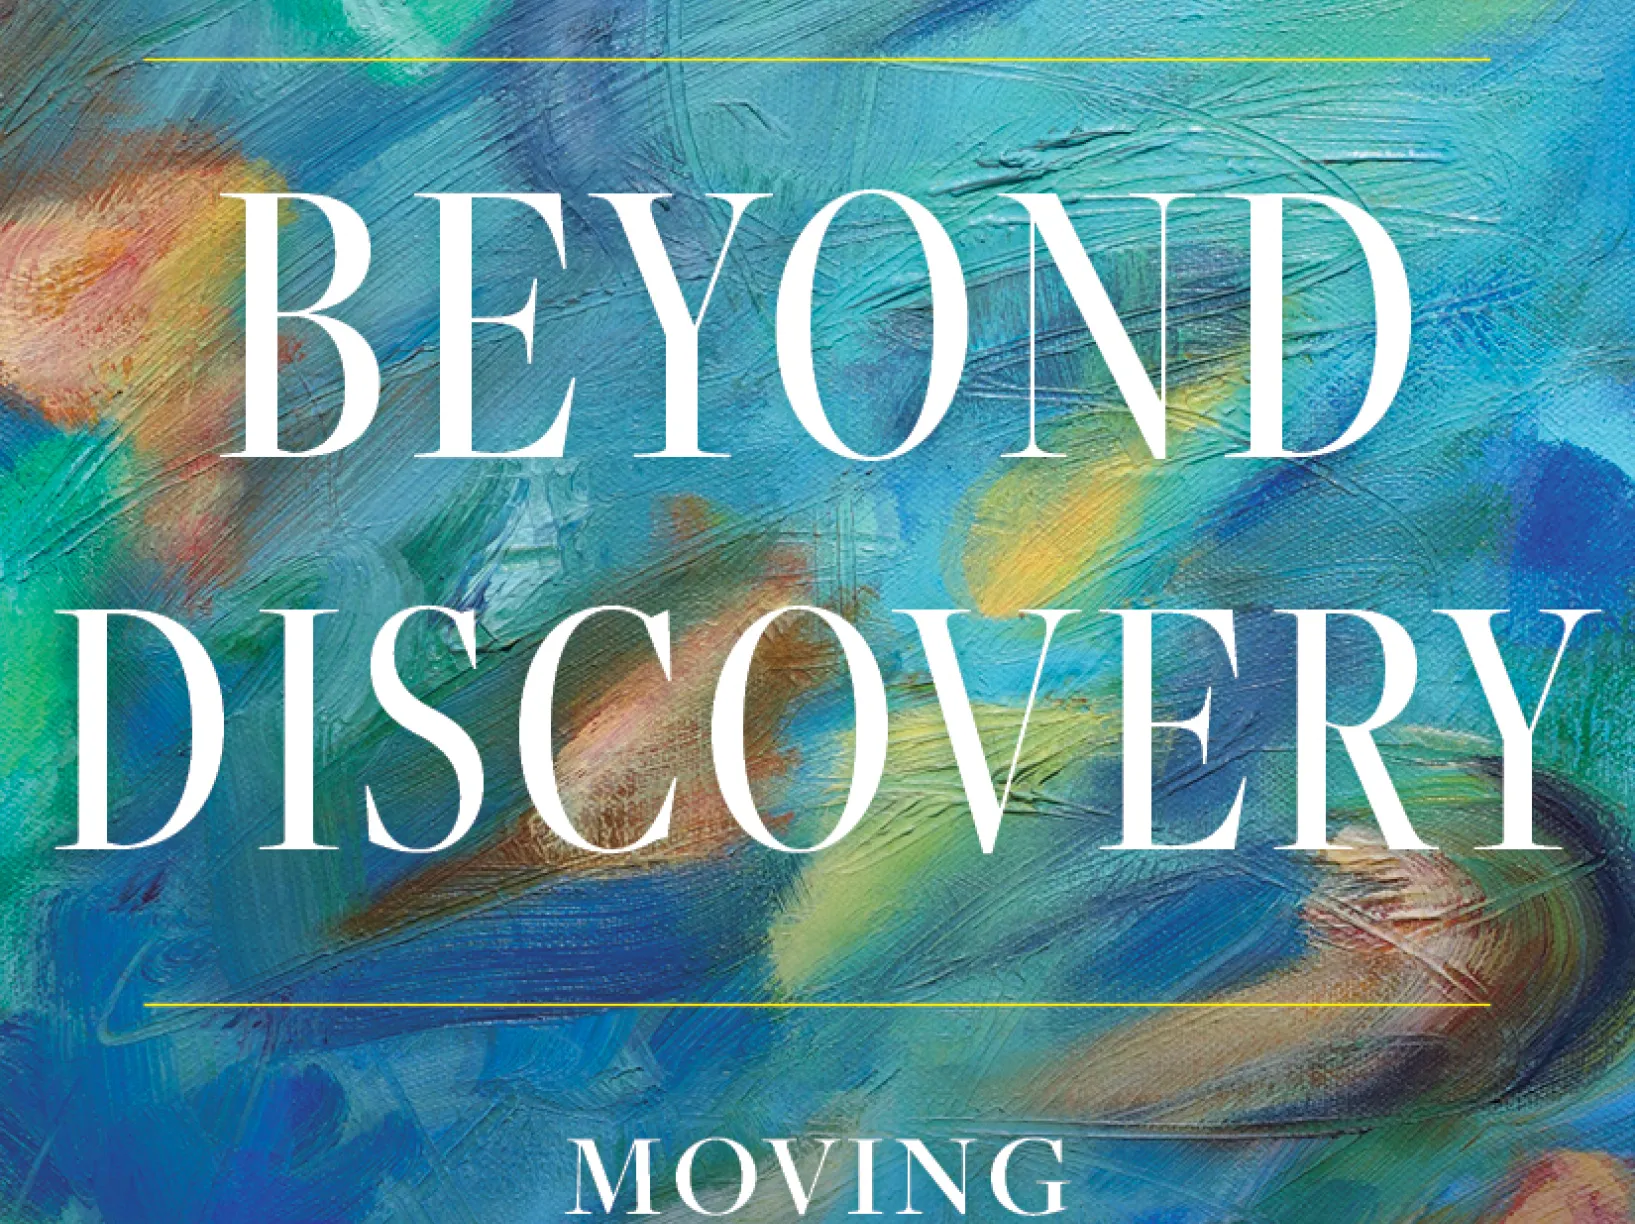 Cover art for the book titled "Beyond Discovery - Moving Academic Research To The Market"